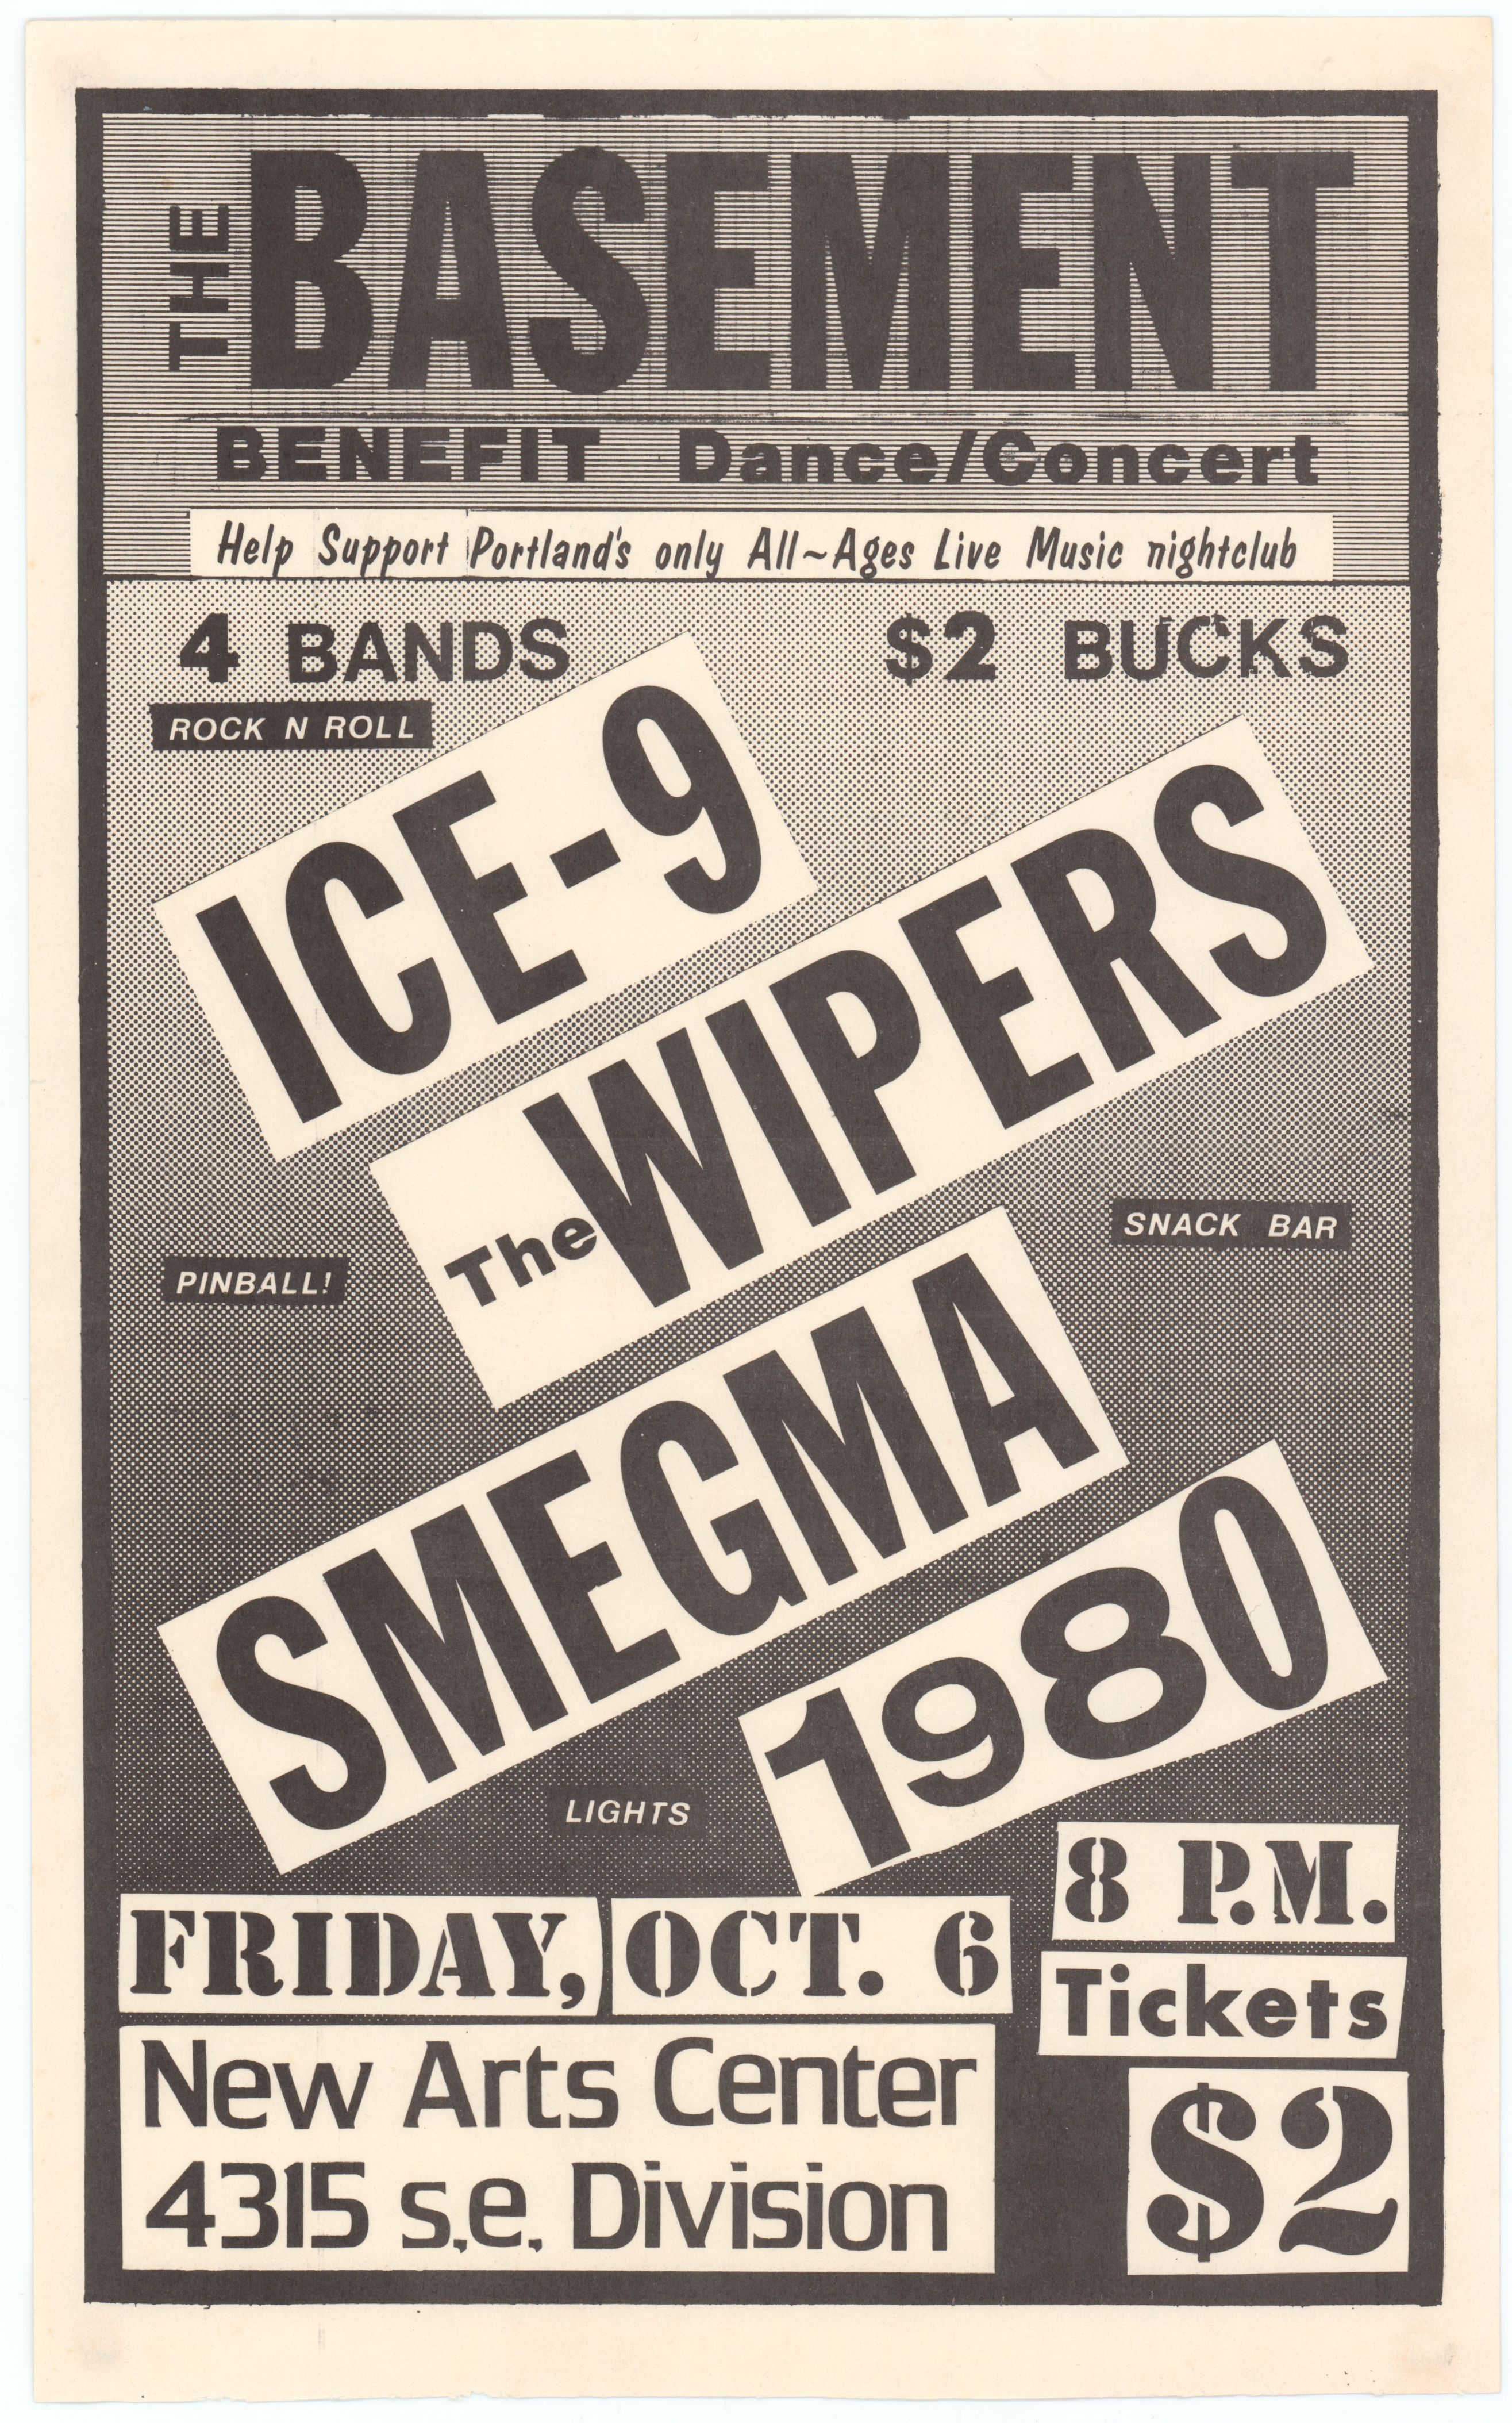 Ice-9 & The Wipers New Arts Center 1978 Concert Poster